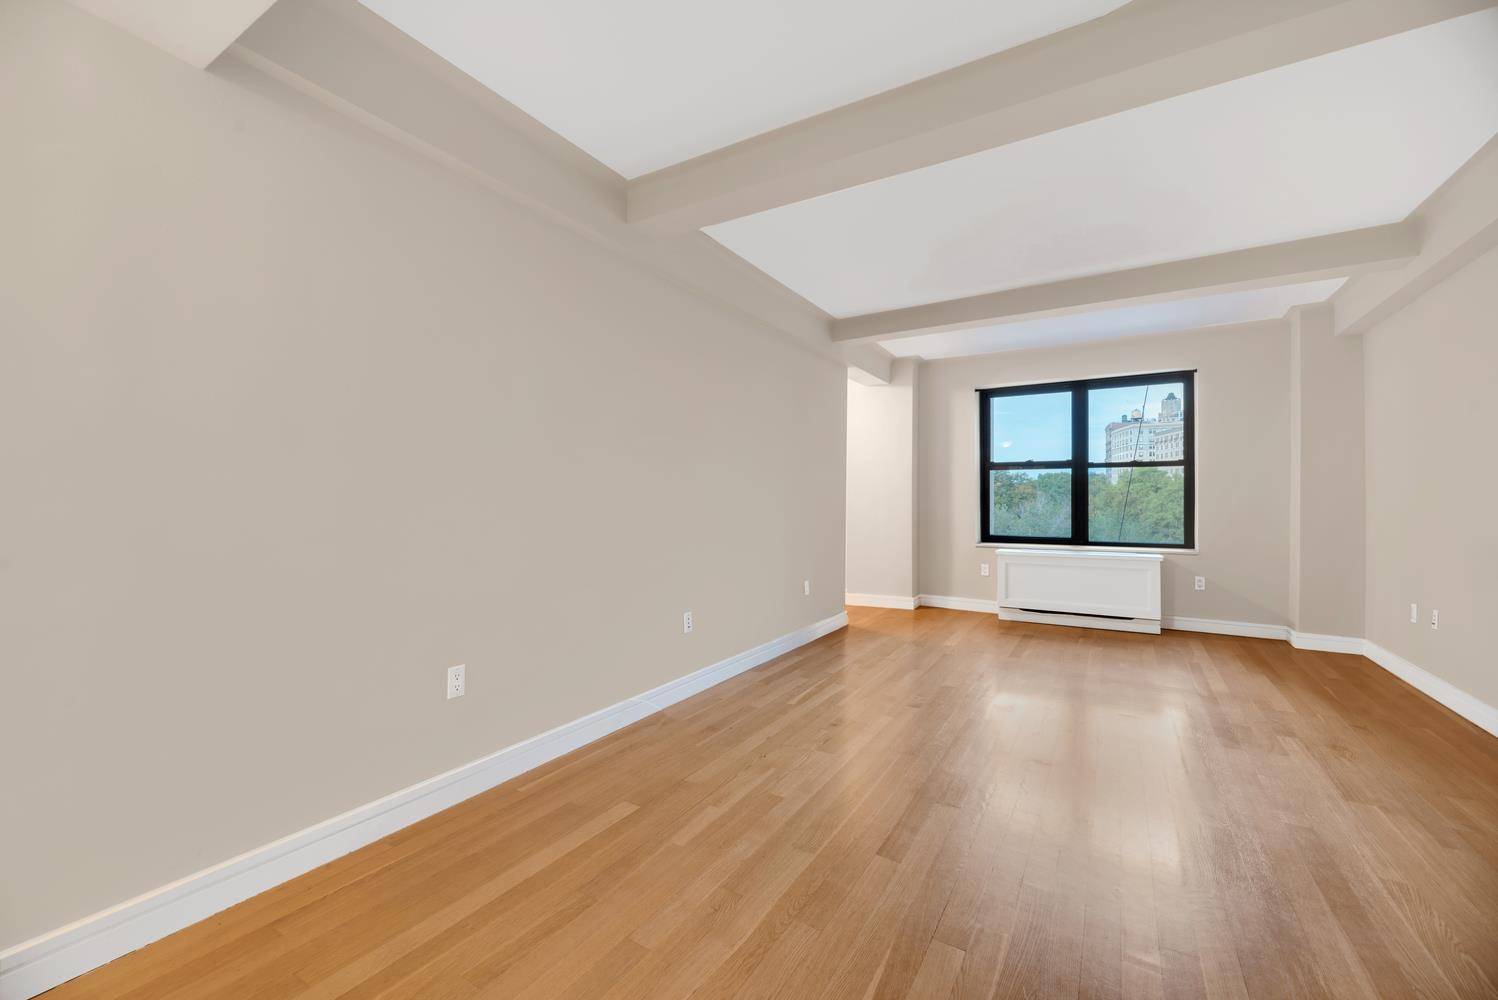 Luxurious high floor studio in this pre war condominium has a beautiful open view looking North up Riverside Drive you can see both the Hudson River and the George Washington ...